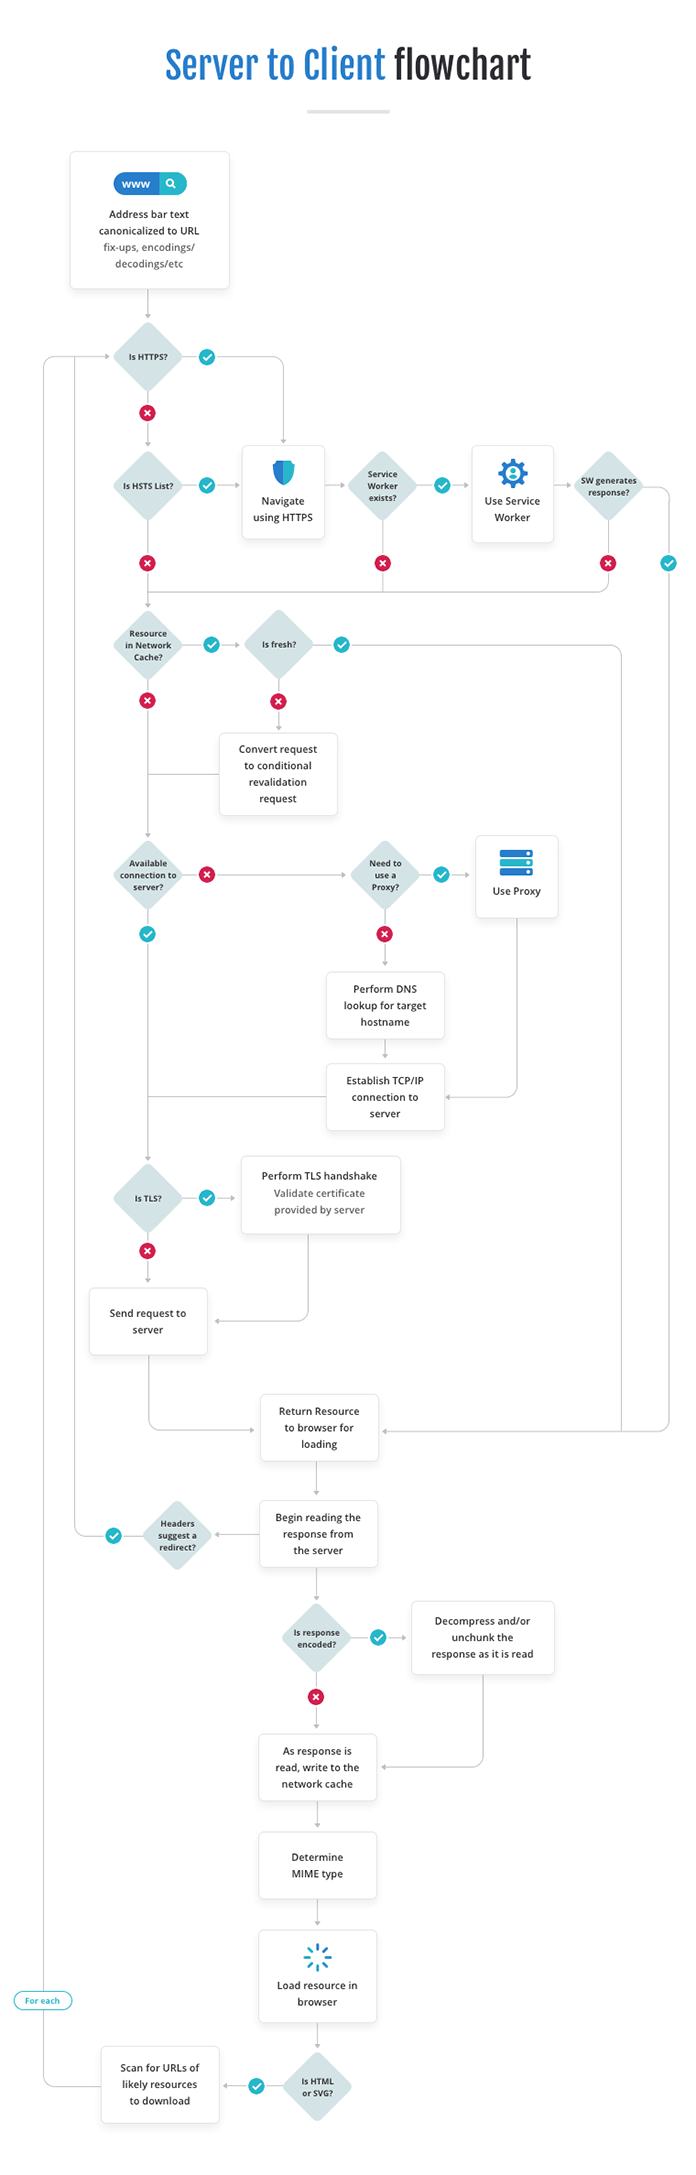 Flowchart showing the path from server to client